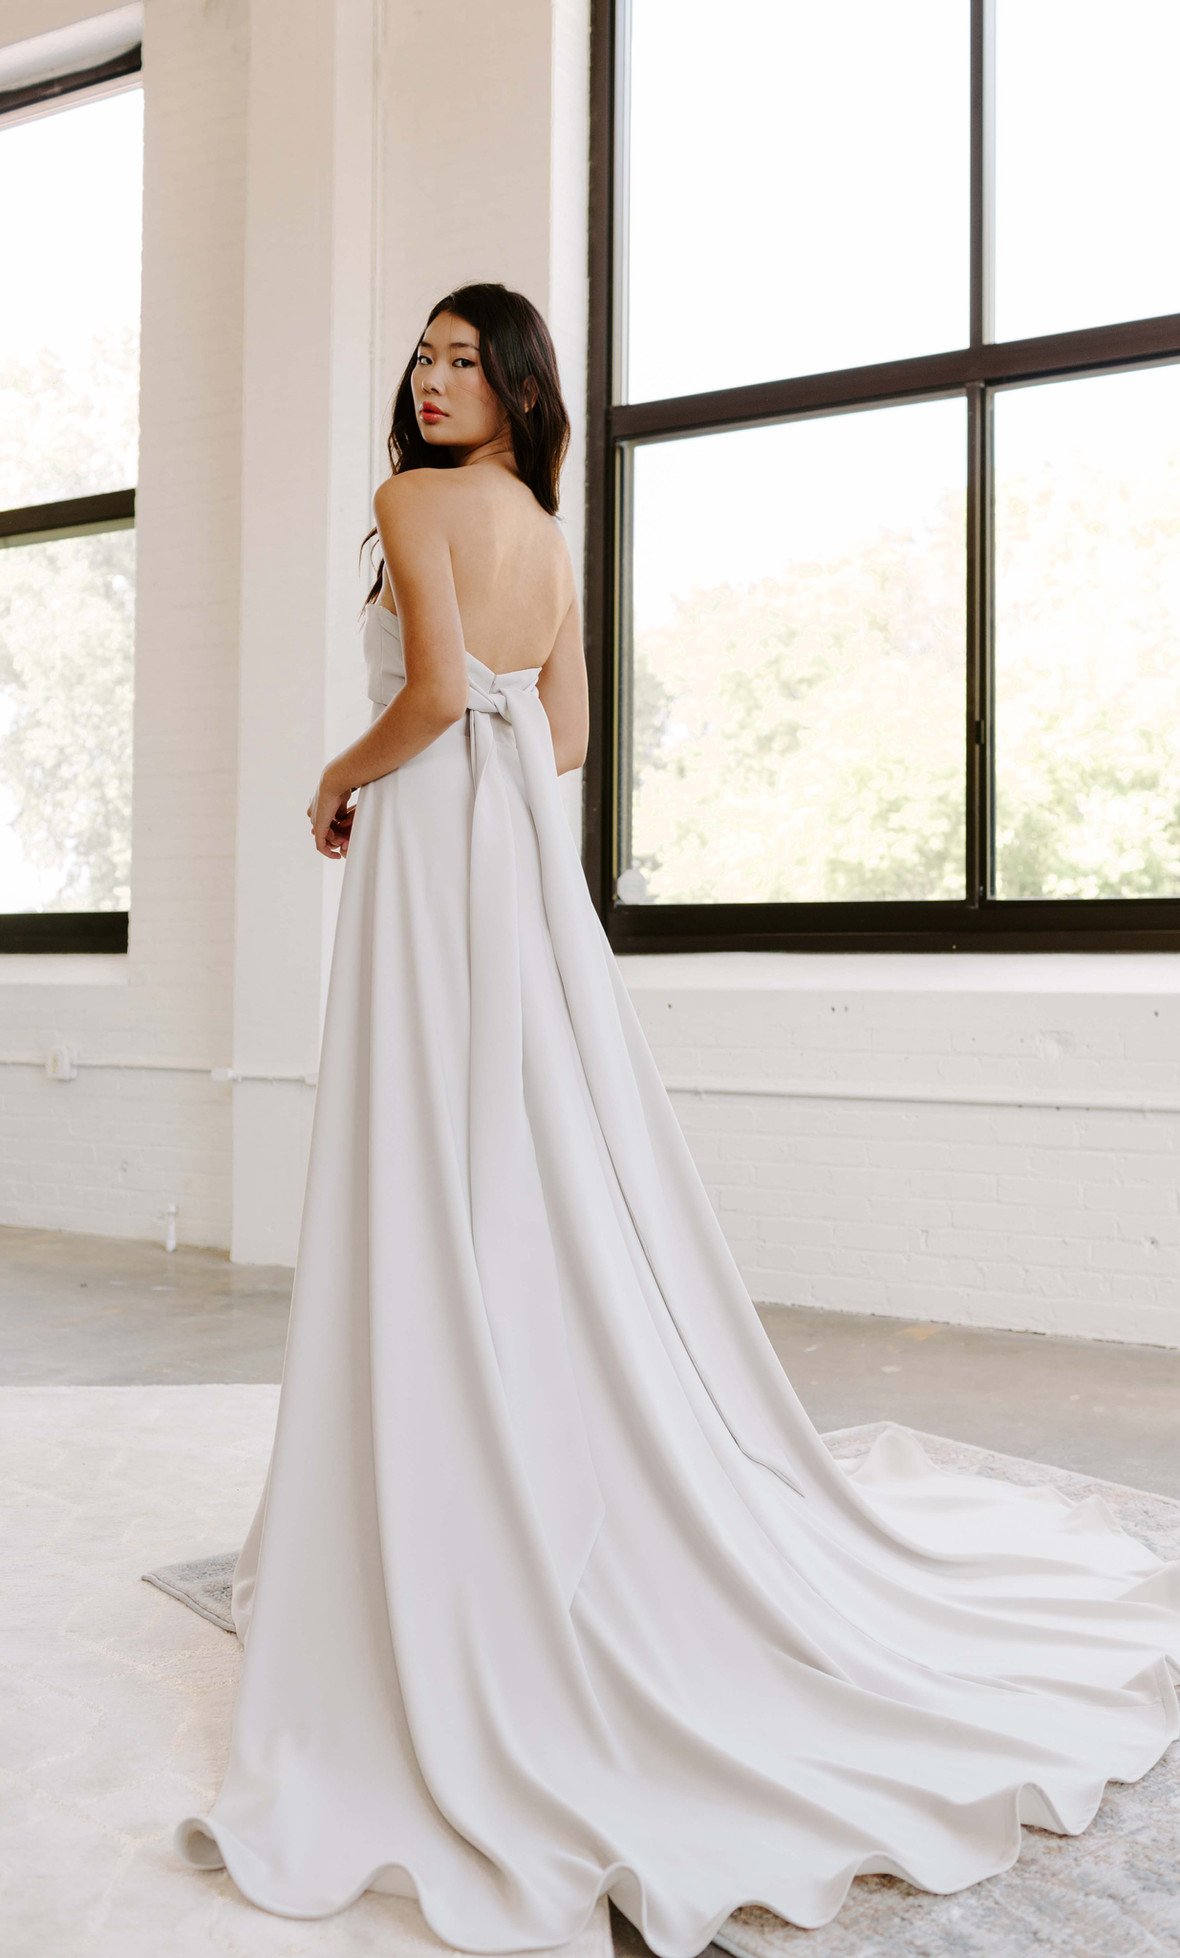 New Arrivals: Rose and Williams by Tara LaTour — Everthine Bridal Boutique